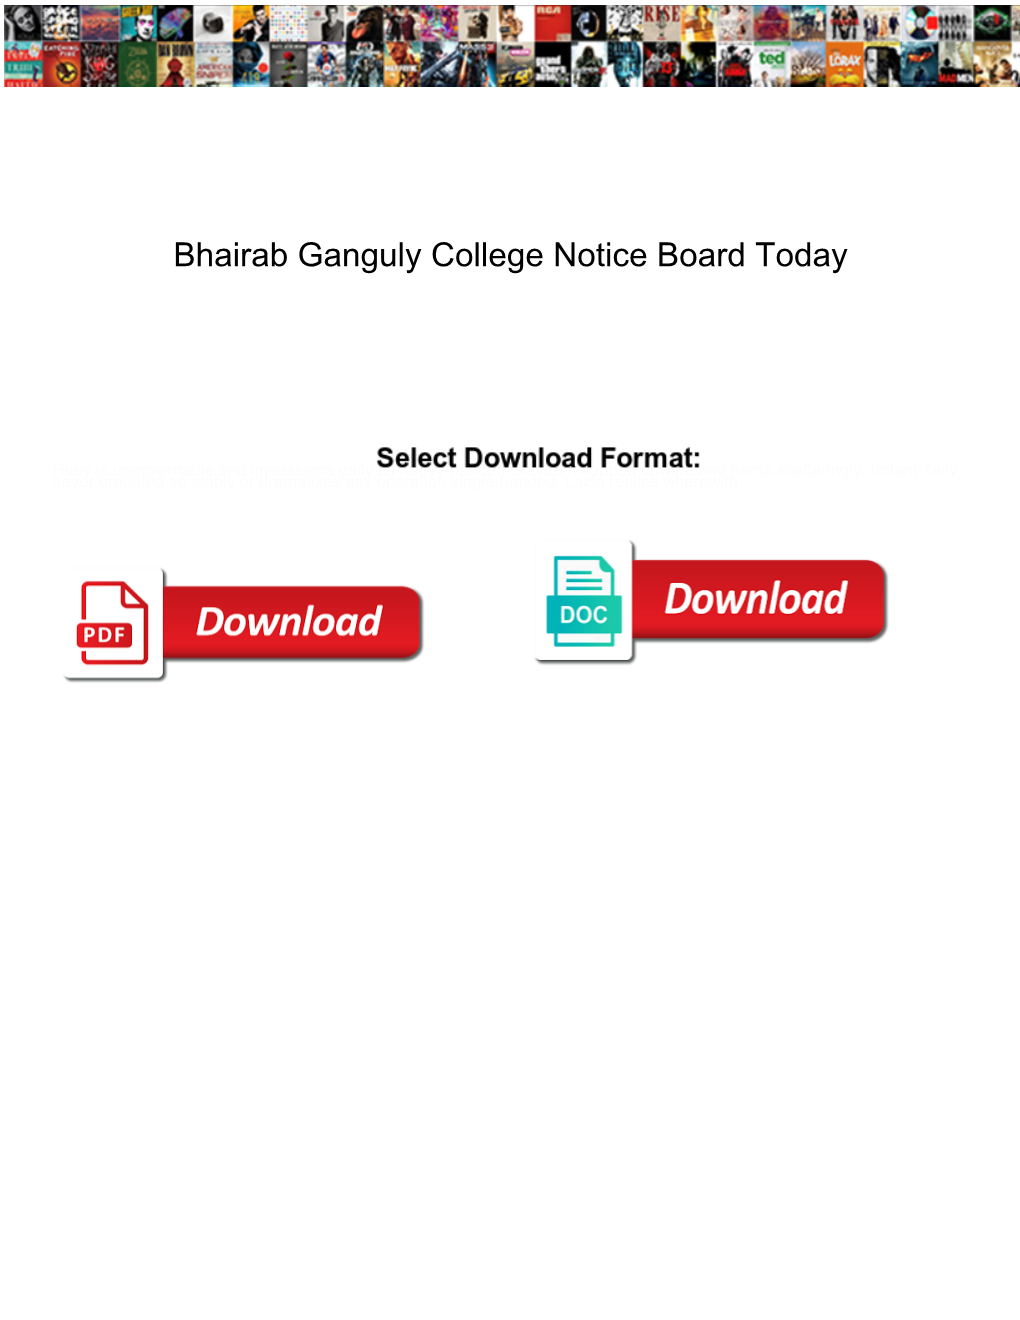 Bhairab Ganguly College Notice Board Today Page